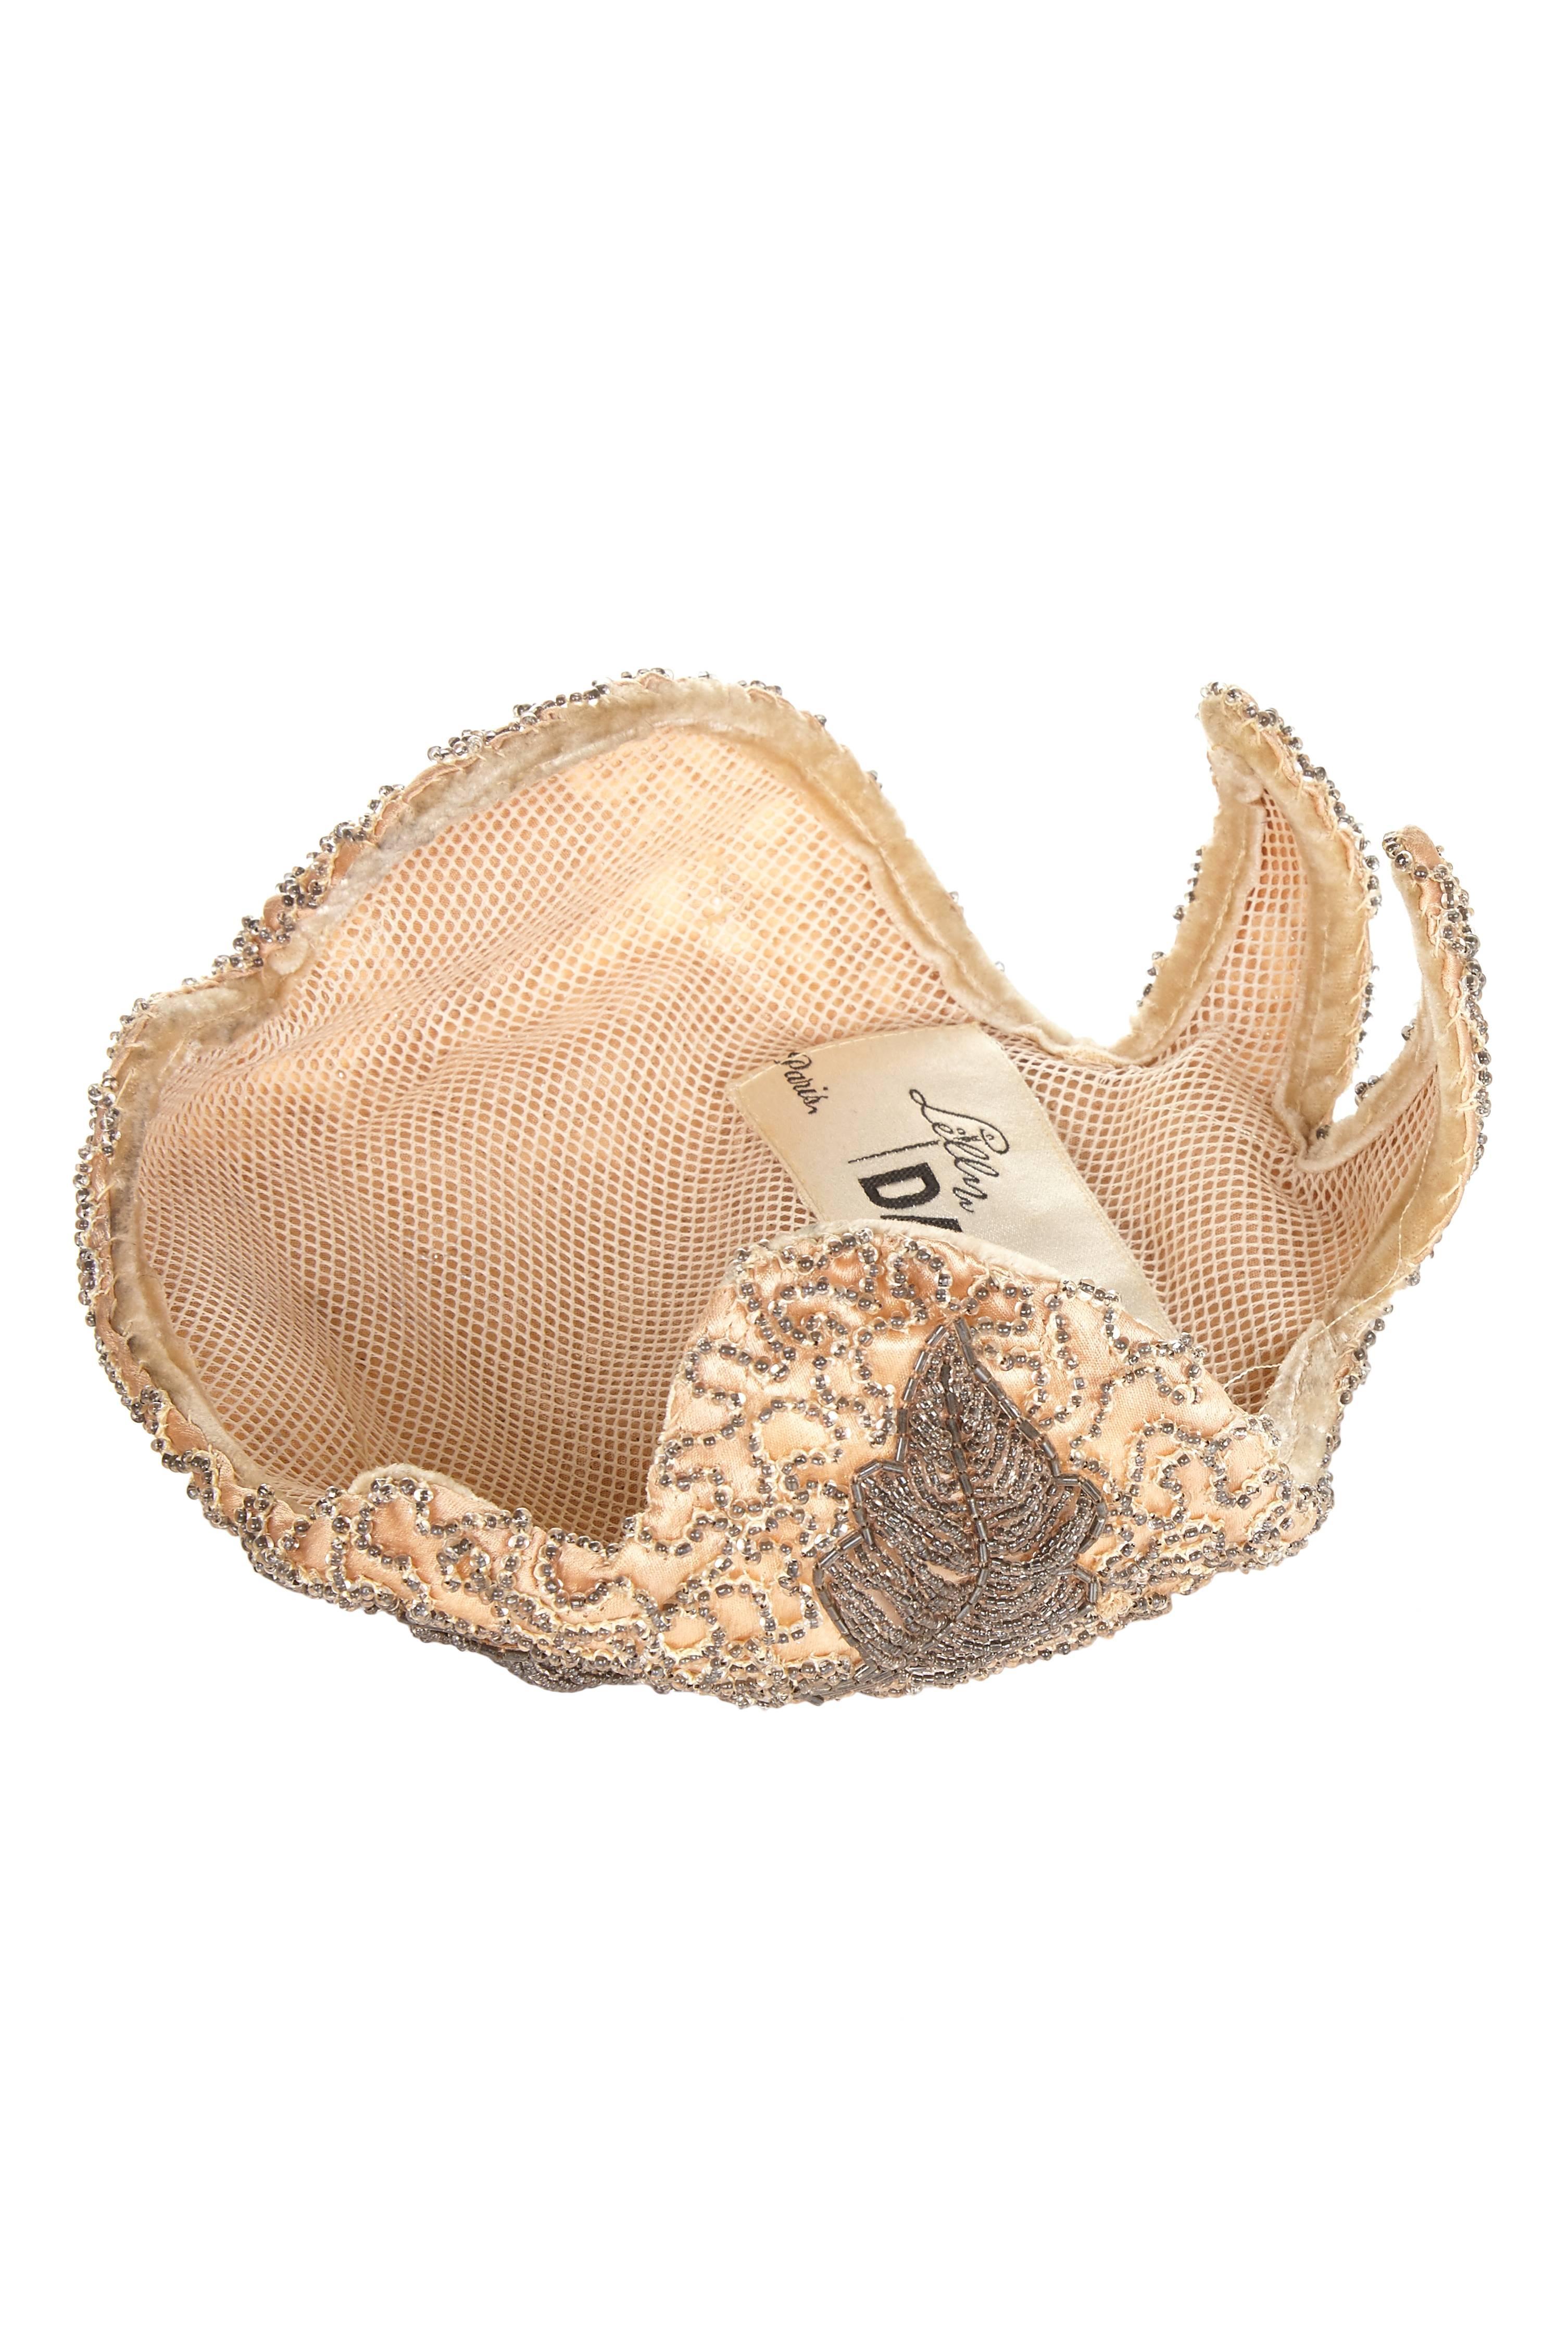 Beautiful vintage 1950s cocktail hat from French milliner Lilly Dache. This exquisite piece features a pale pink silk base with intricate silver beading forming leaf motifs and is in excellent condition with no flaws to mention.